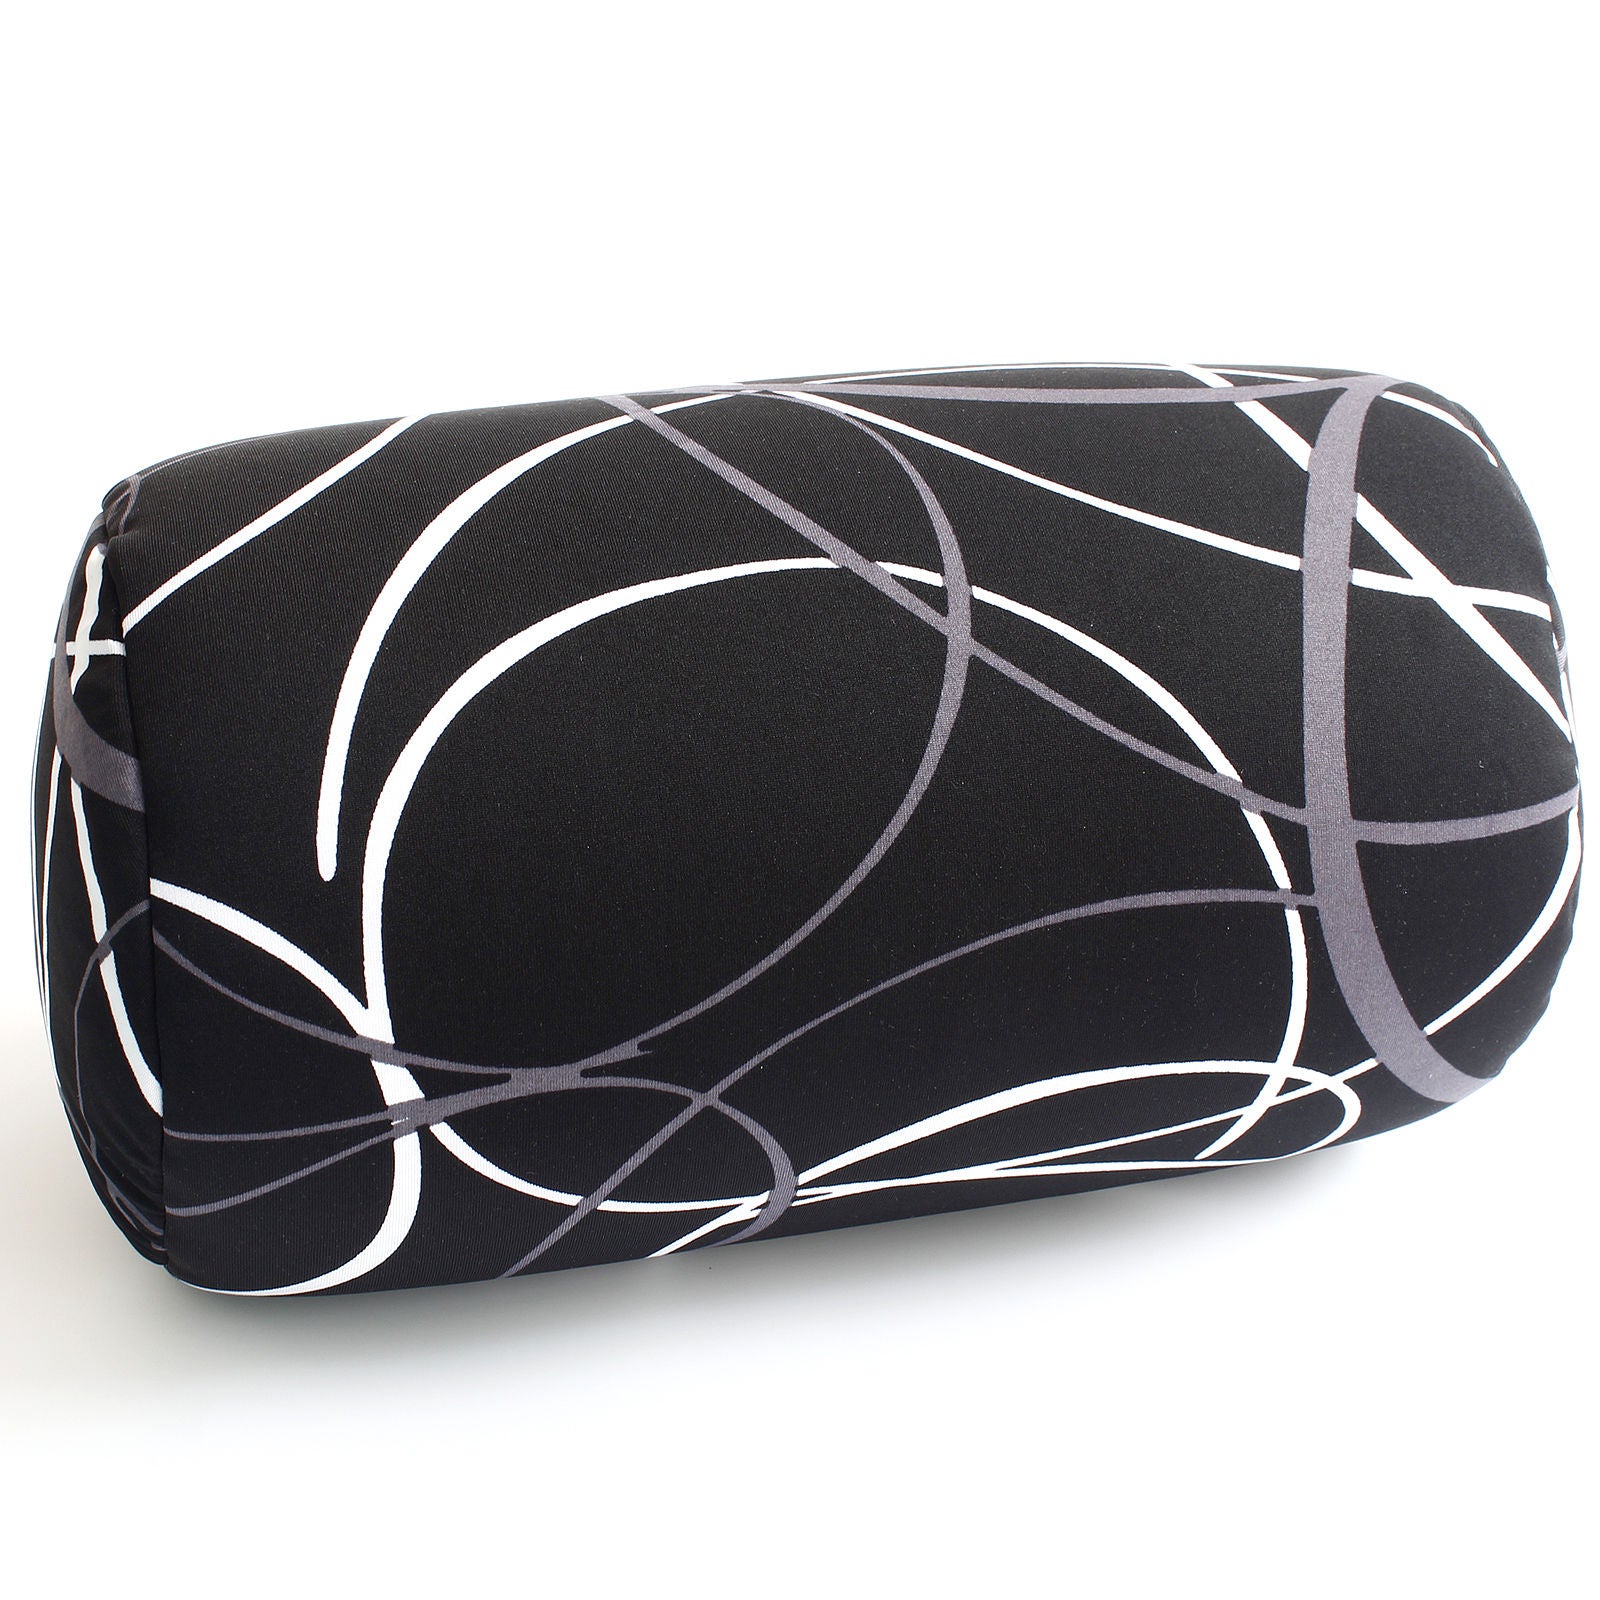 Bookishbunny Micro bead Roll Bed Chair Car Cushion Neck Head Soft Support Back Pillow Black White